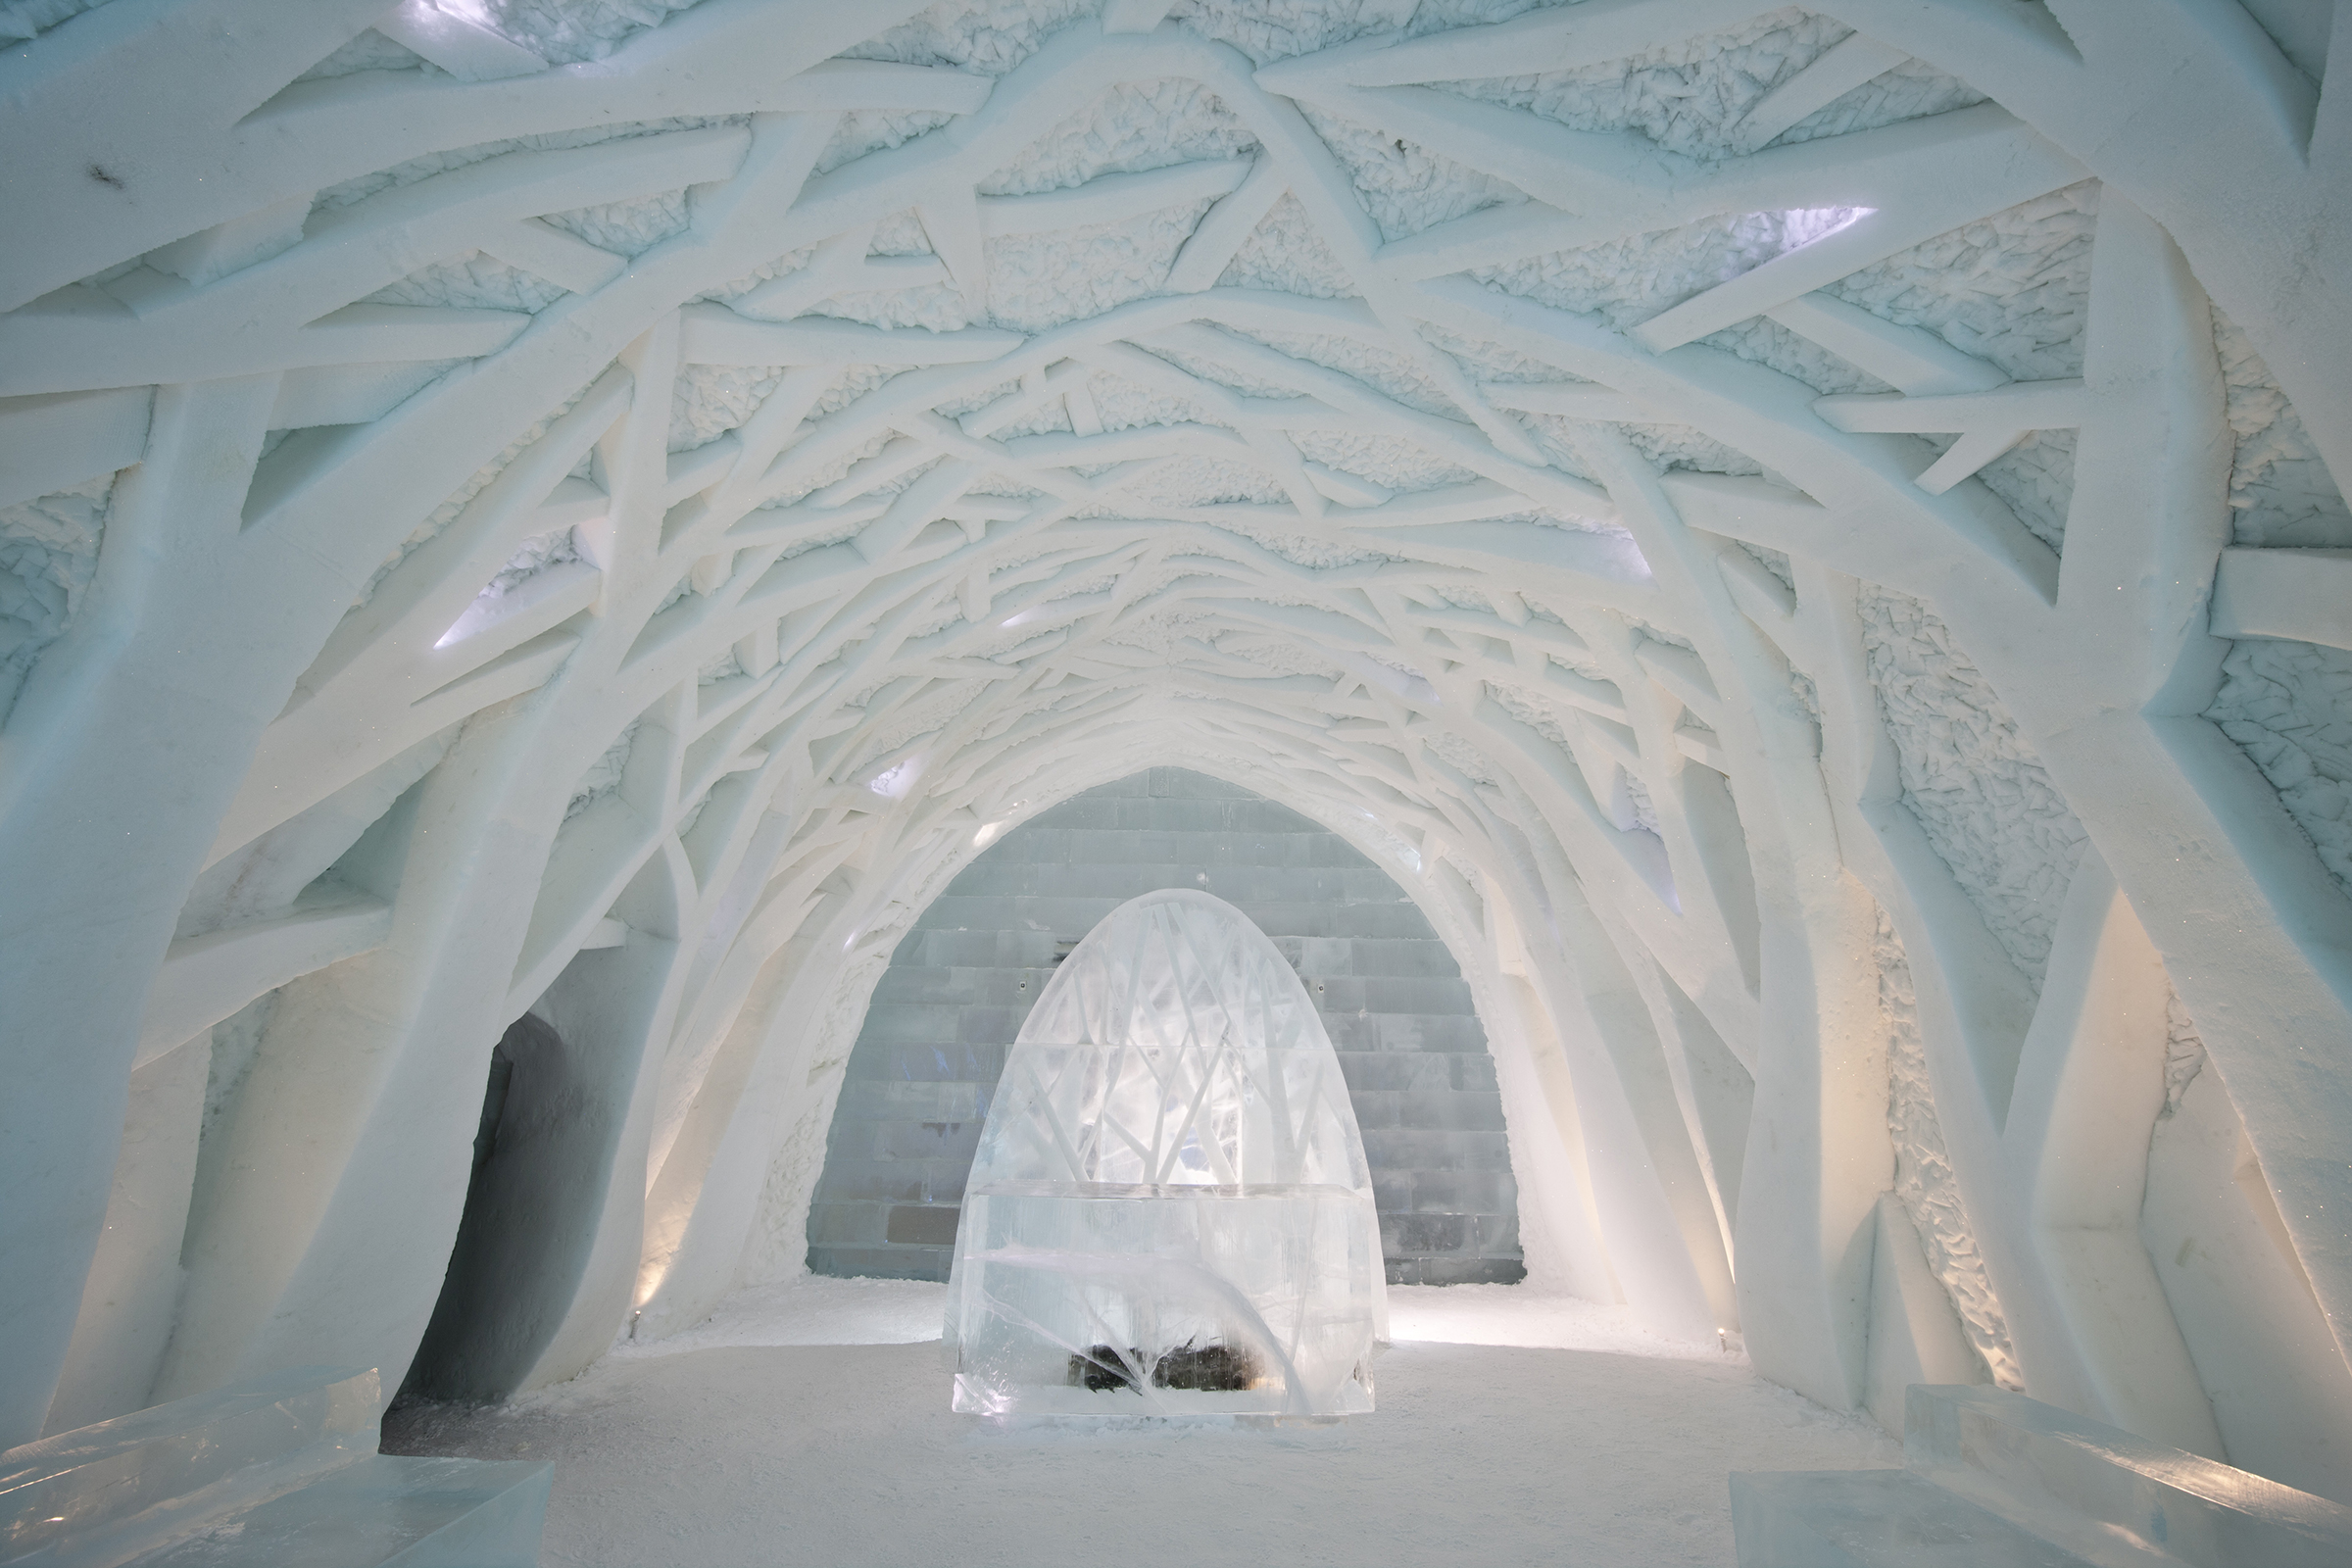 PHOTO: The foyer of the Ice Hotel in Kiruna, Sweden is seen in this undated image.